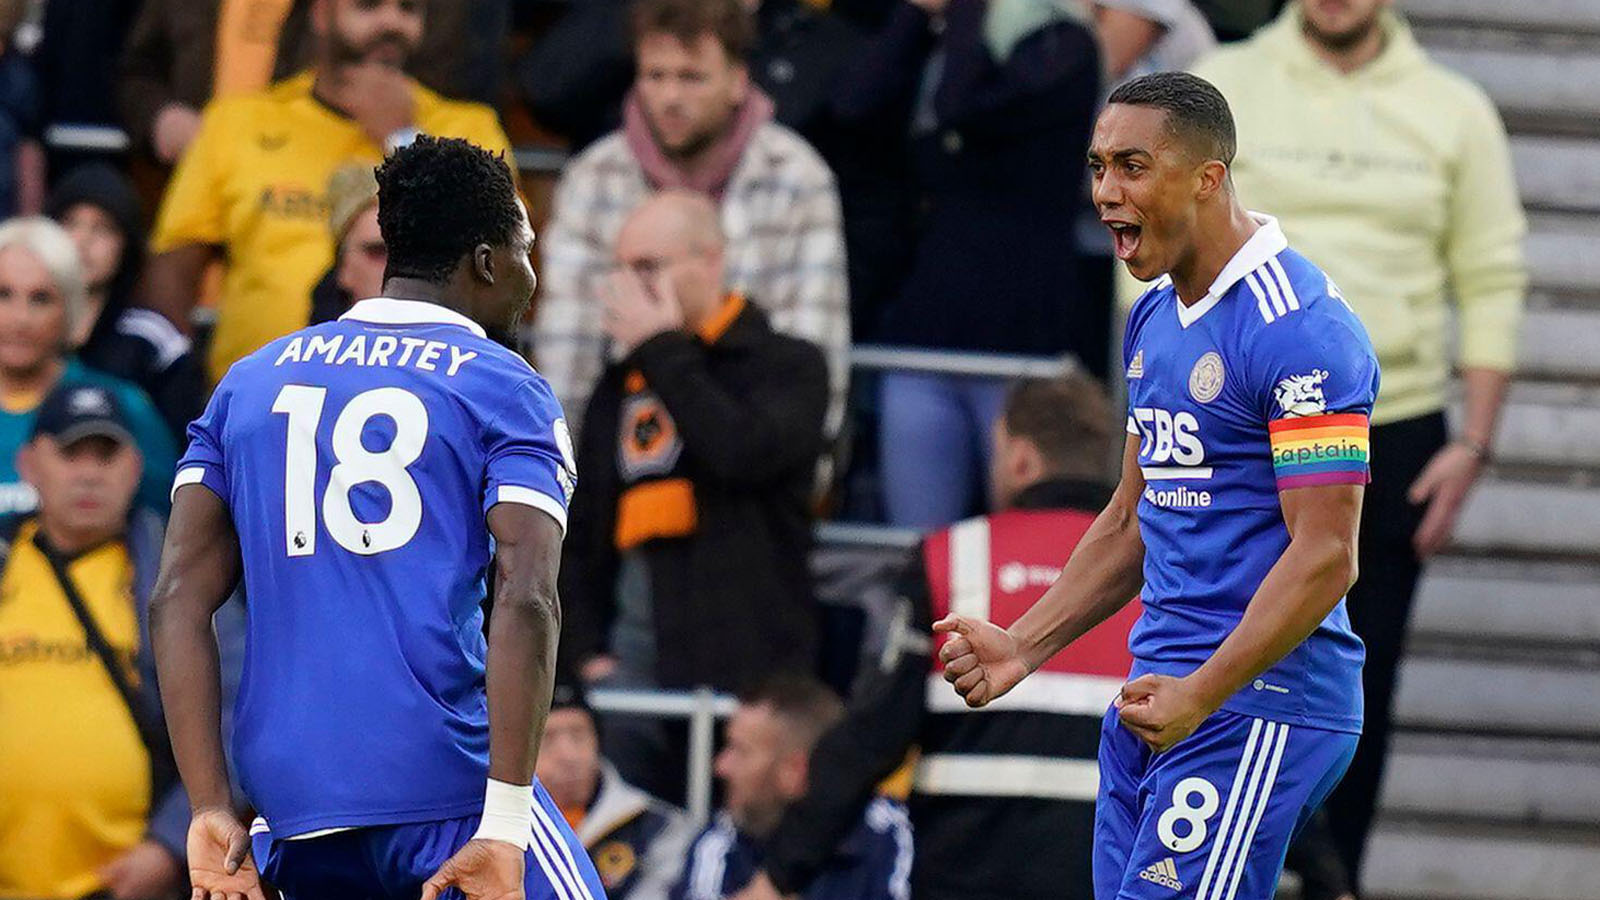 Youri Tielemans of Leicester City (R) celebrates after scoring the opening goal during